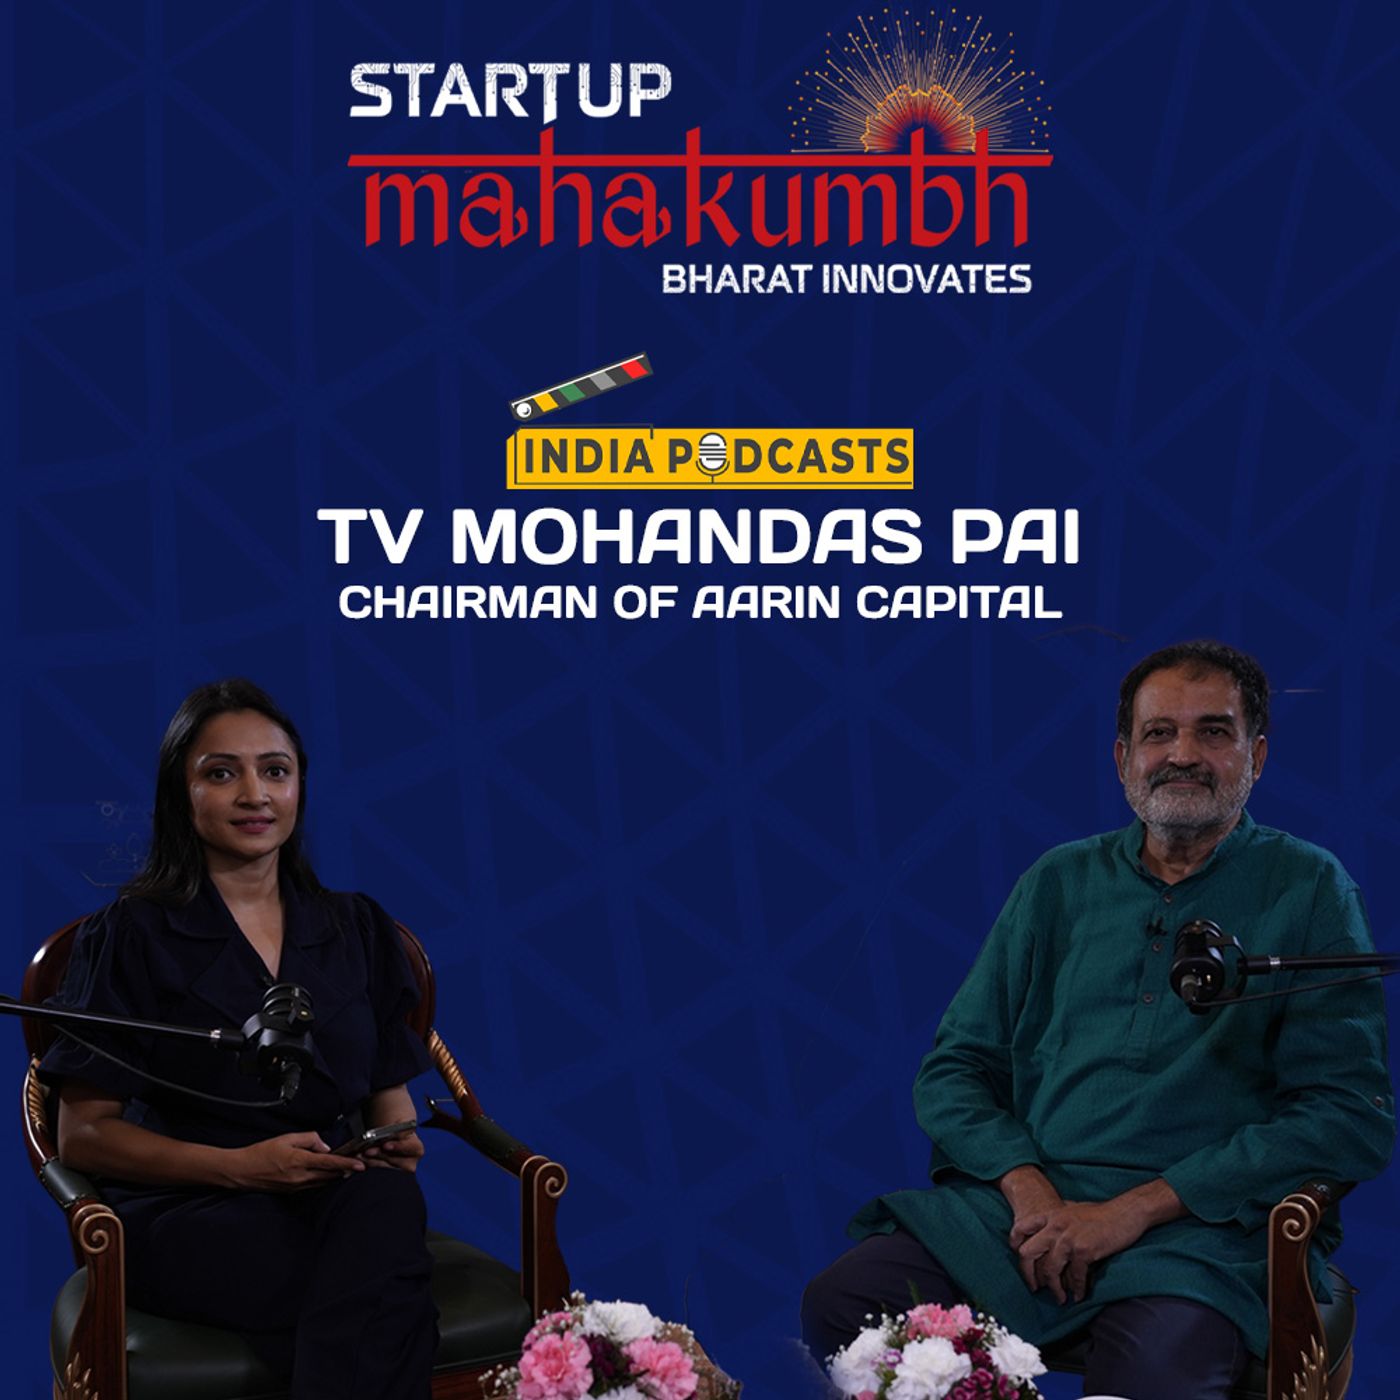 By 2025 India Will Have The lLargest Number Of Tech people In The World: T.V. Mohandas Pai